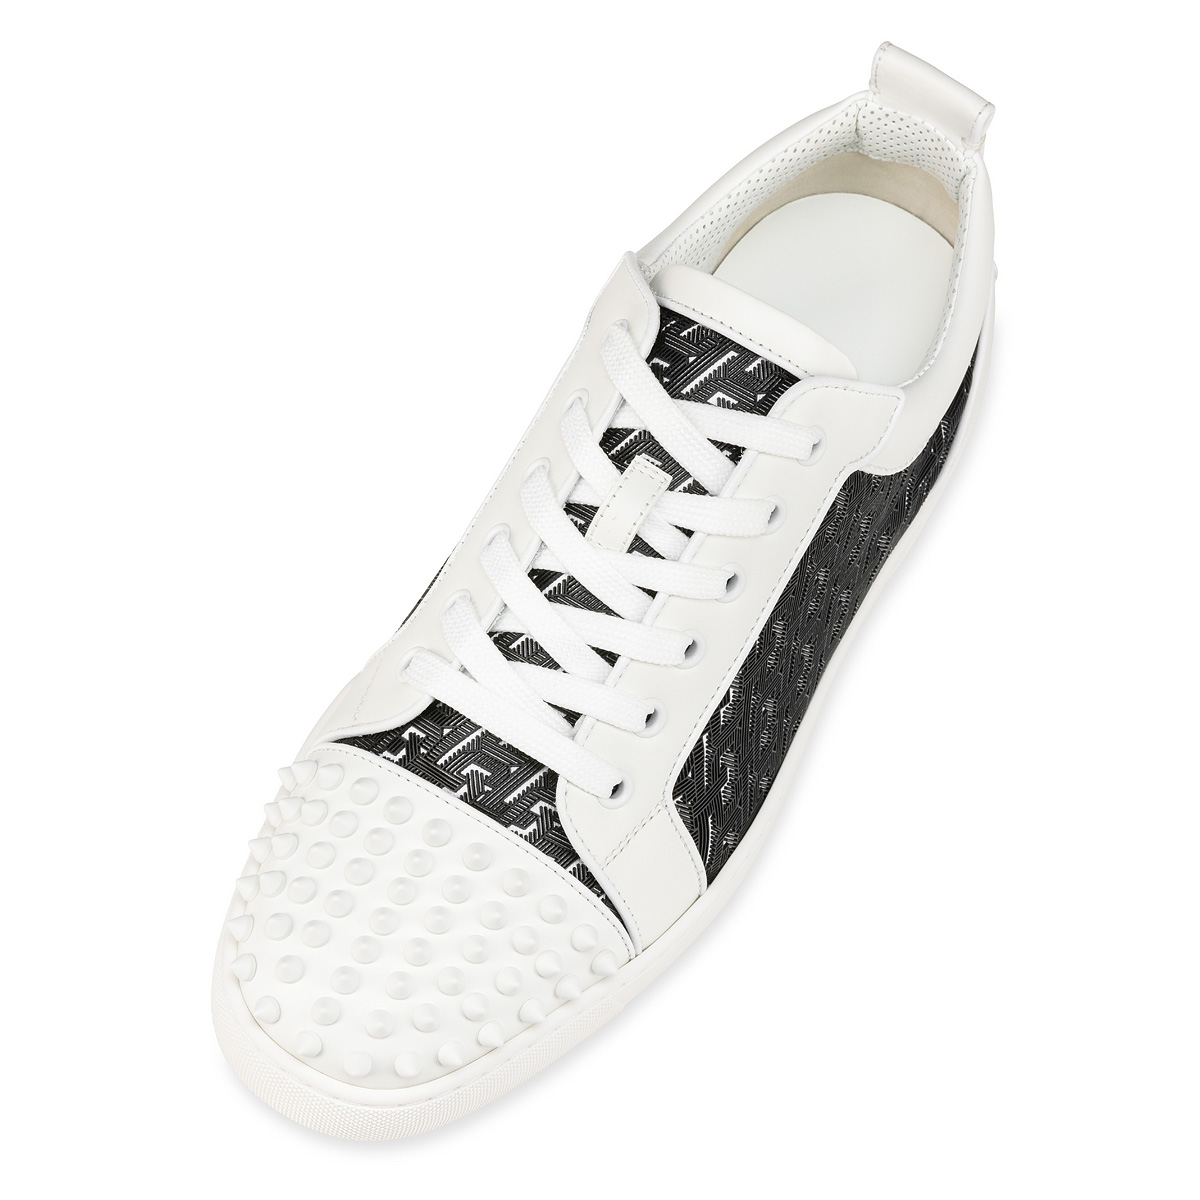 Louis Junior Spikes - Sneakers - Calf leather, coated canva Techno CL,  nappa leather and spikes - White - Christian Louboutin